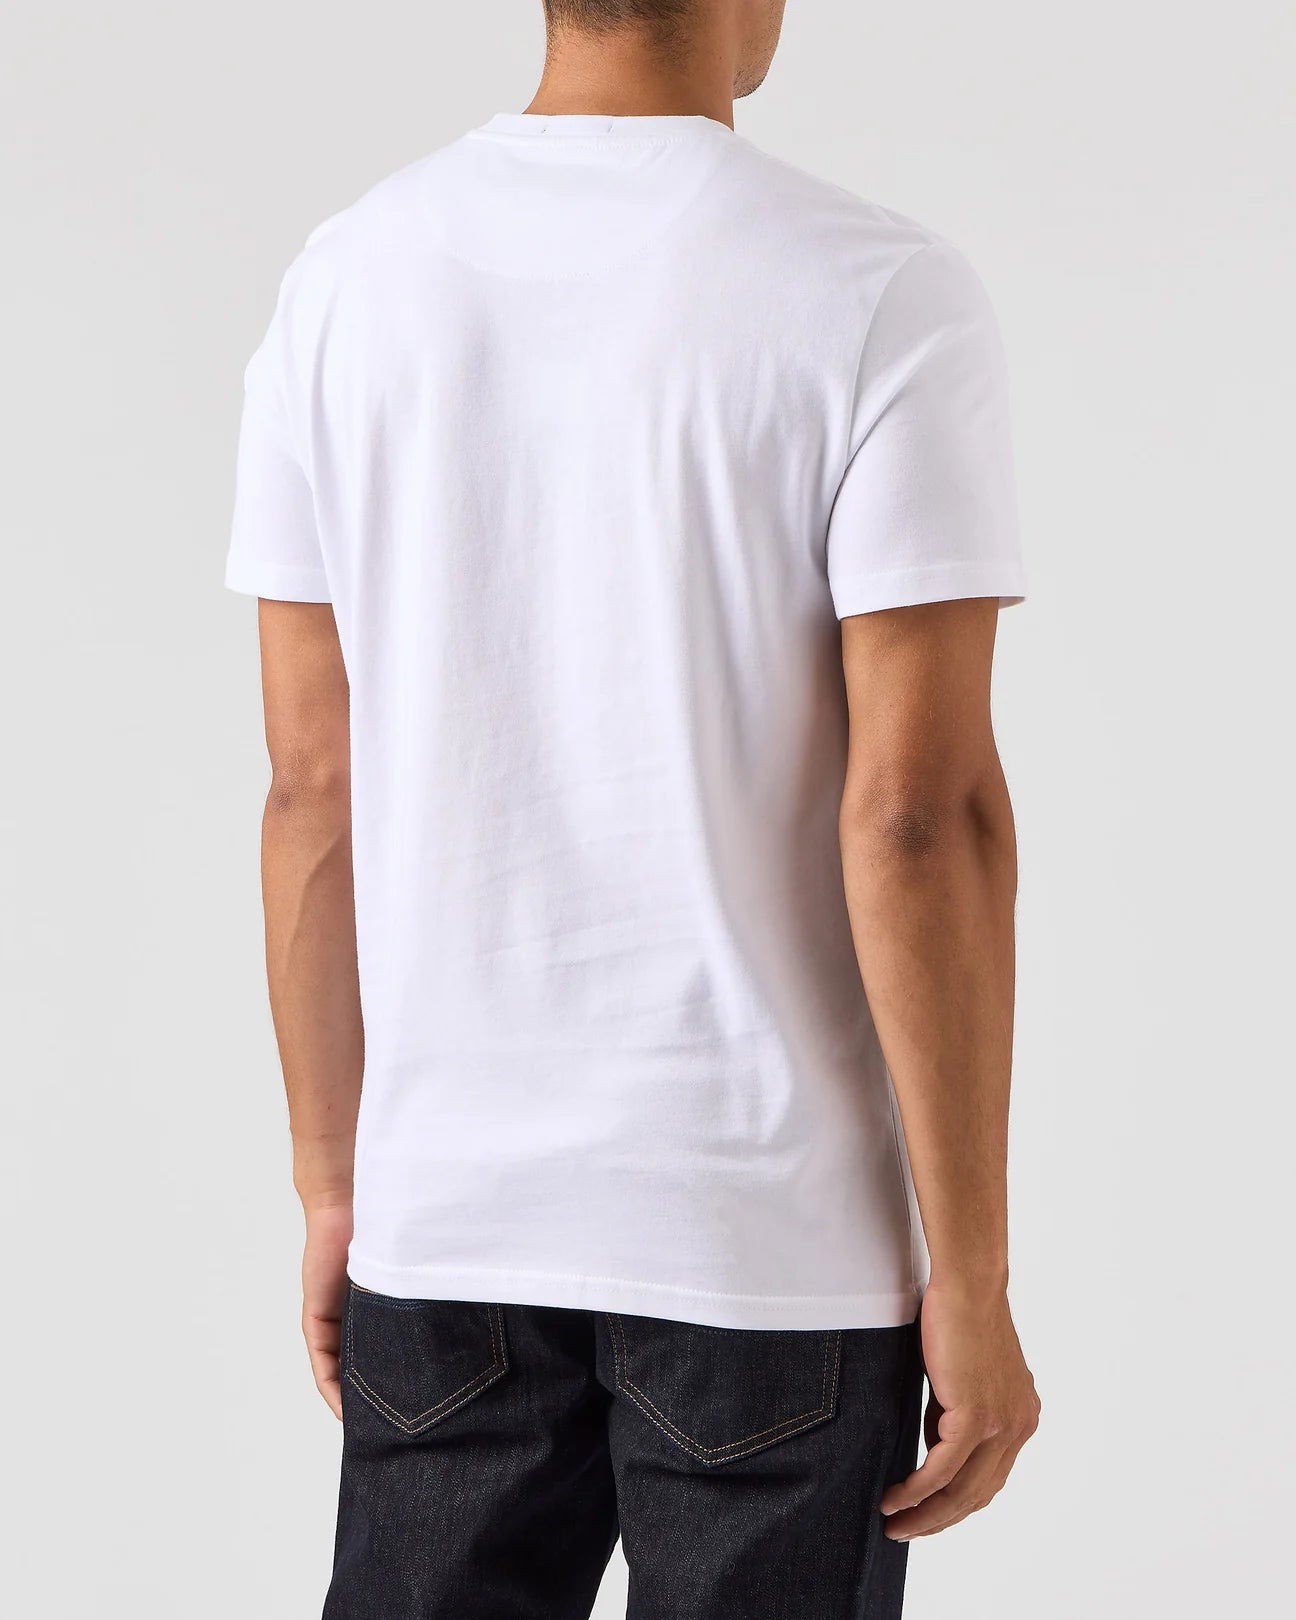 Weekend Offender Polaroids Graphic T-Shirt White